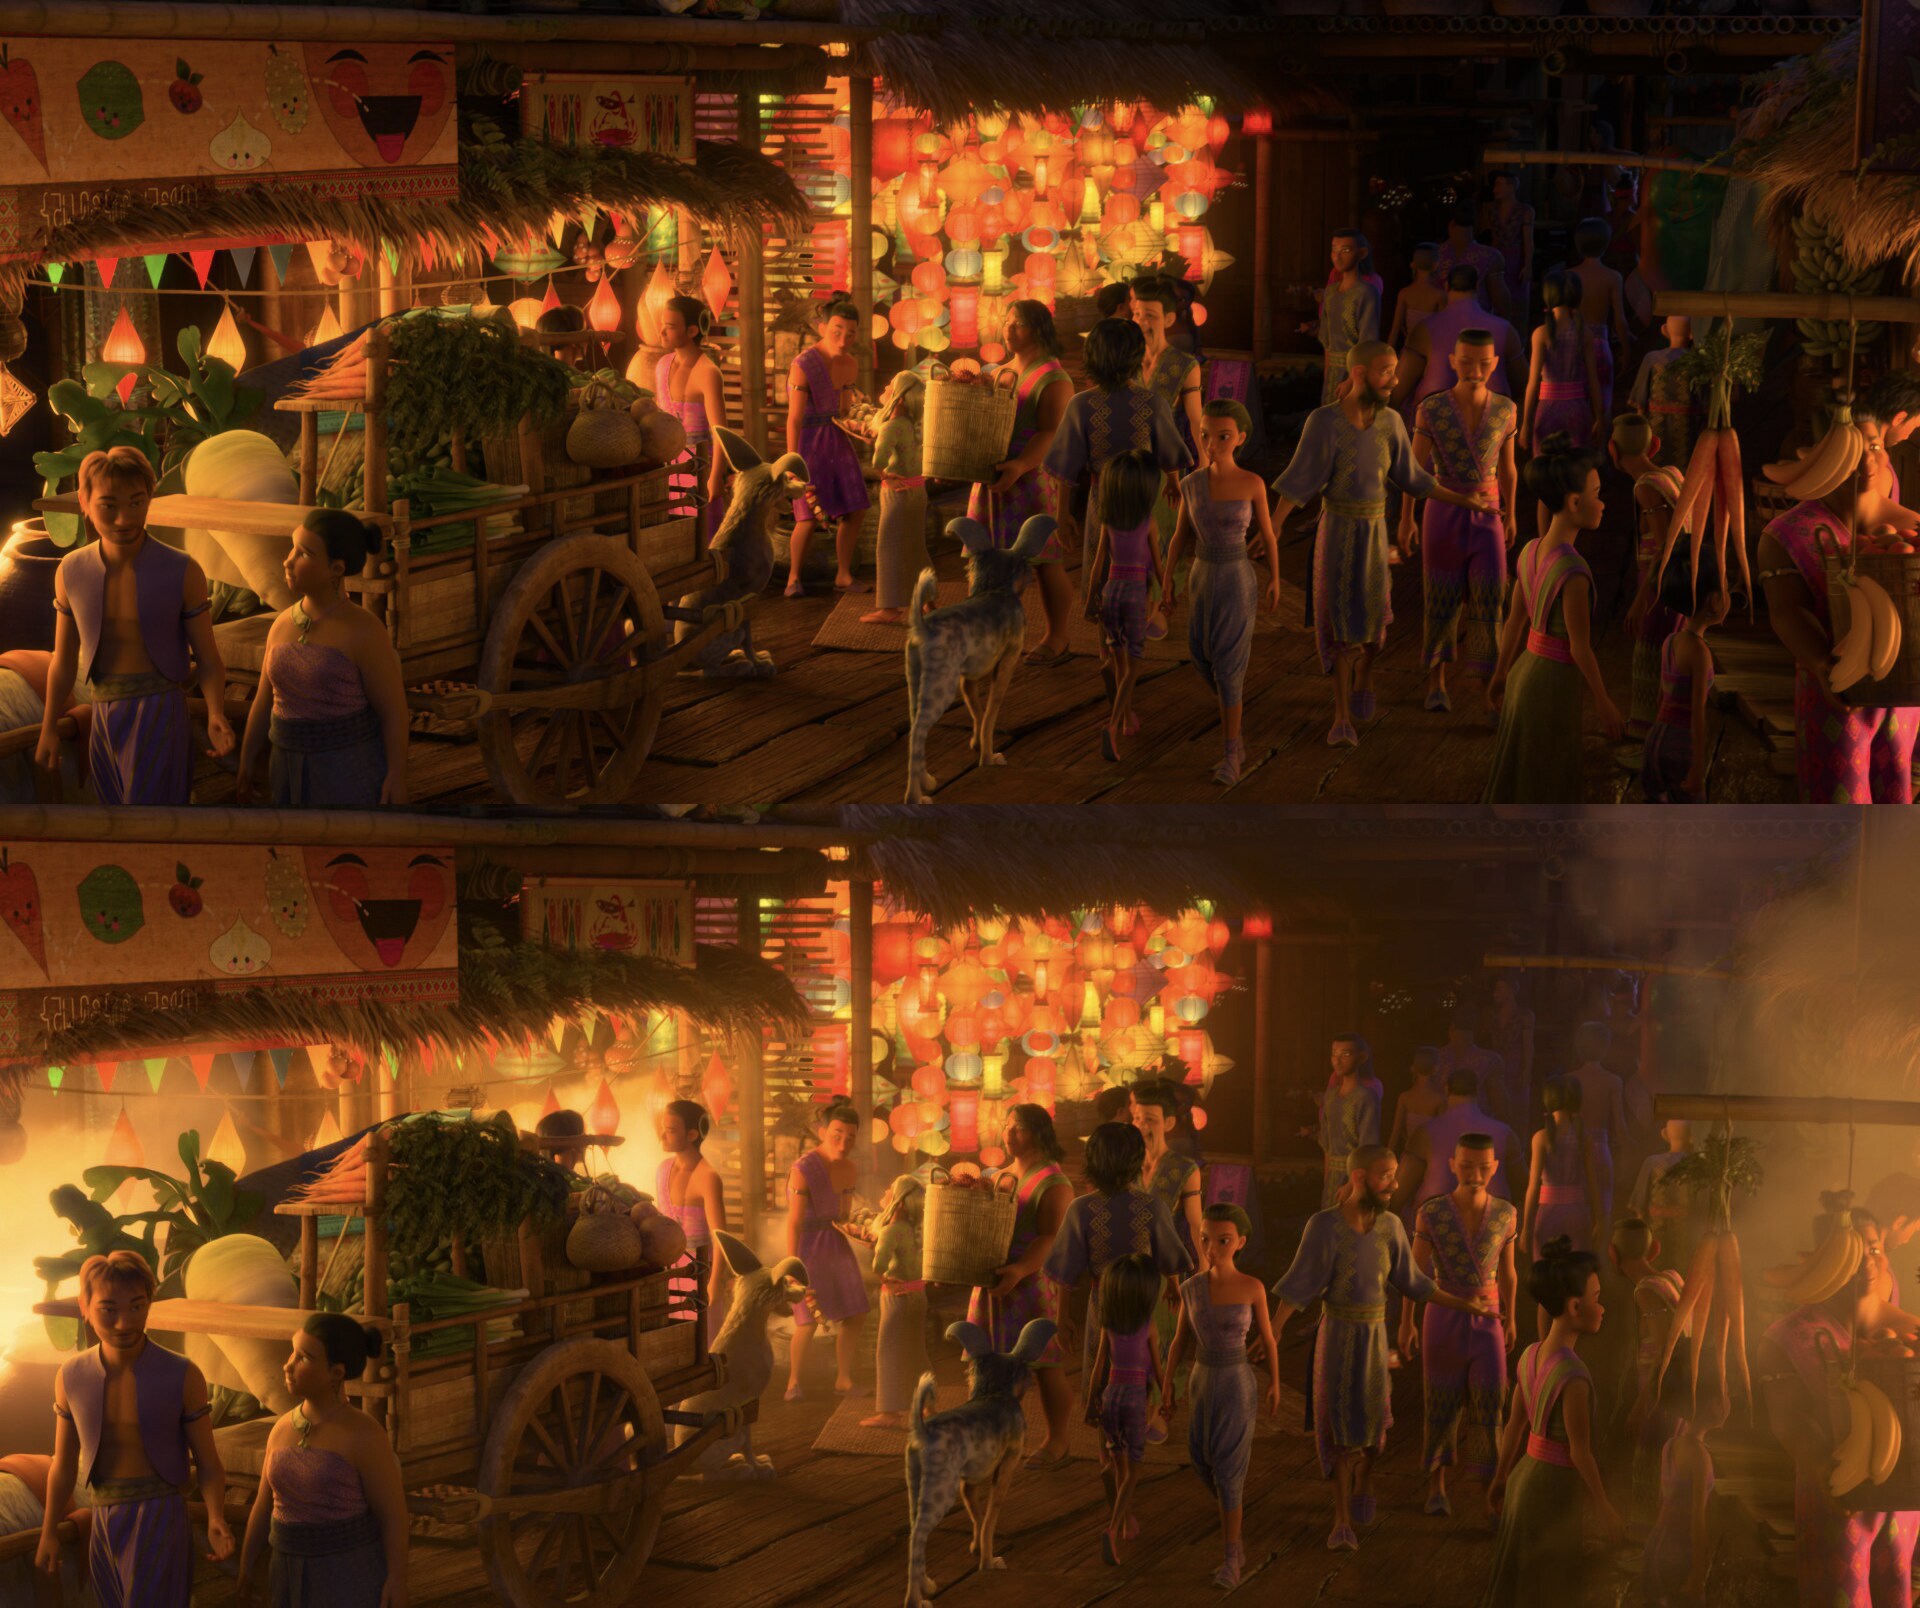 The marketplace of Talon before & after the application of the atmospheric library created by the Effects and Lighting teams.